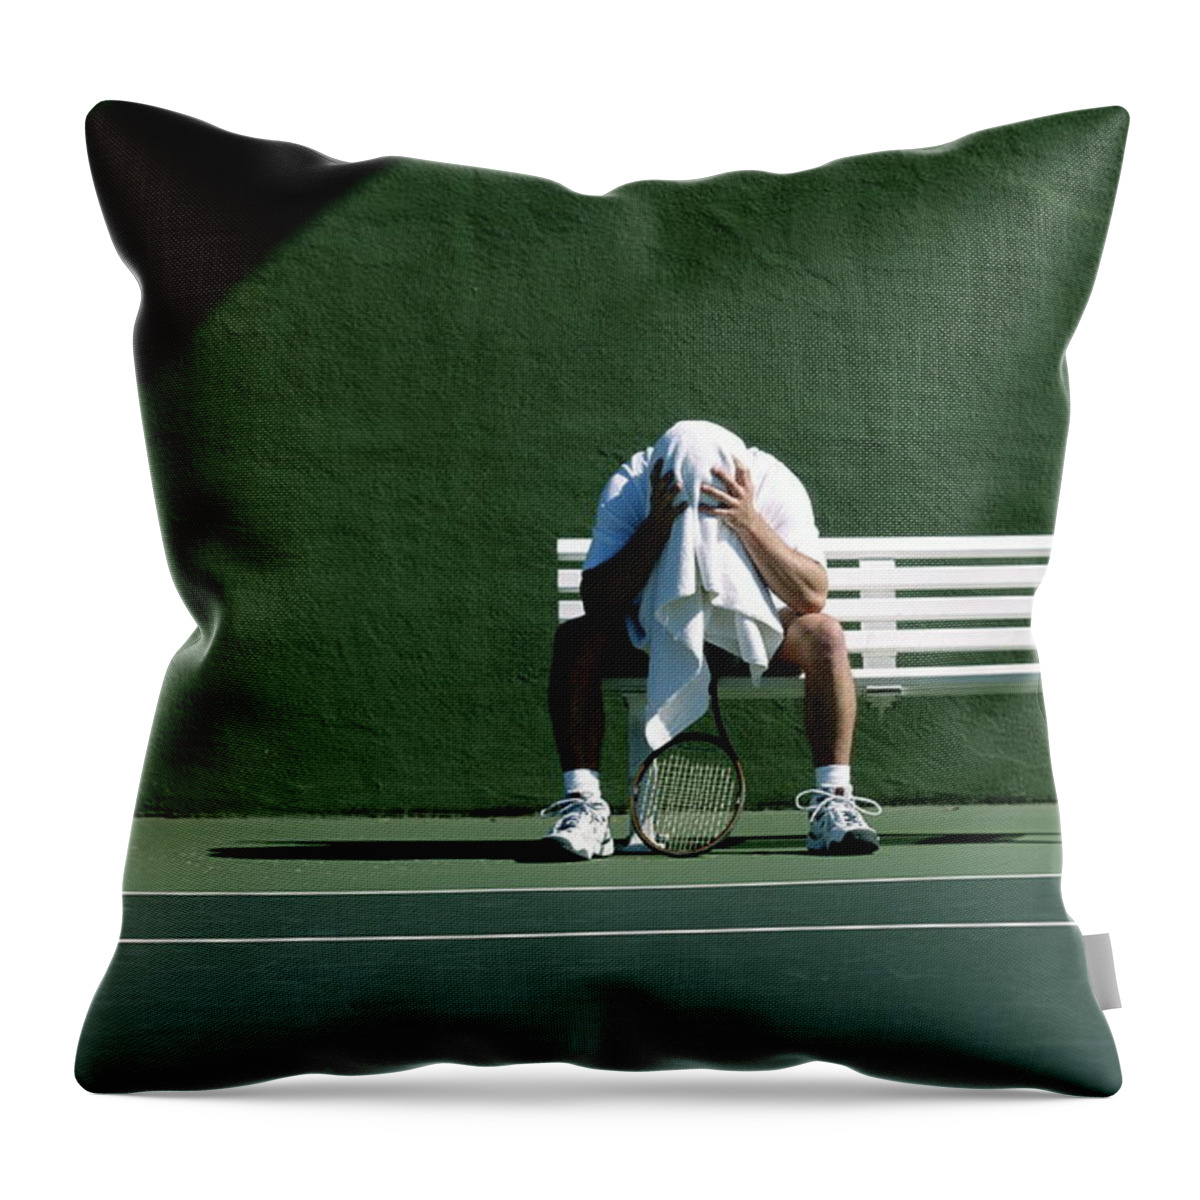 Tennis Throw Pillow featuring the photograph Tennis Player On Bench by David Madison